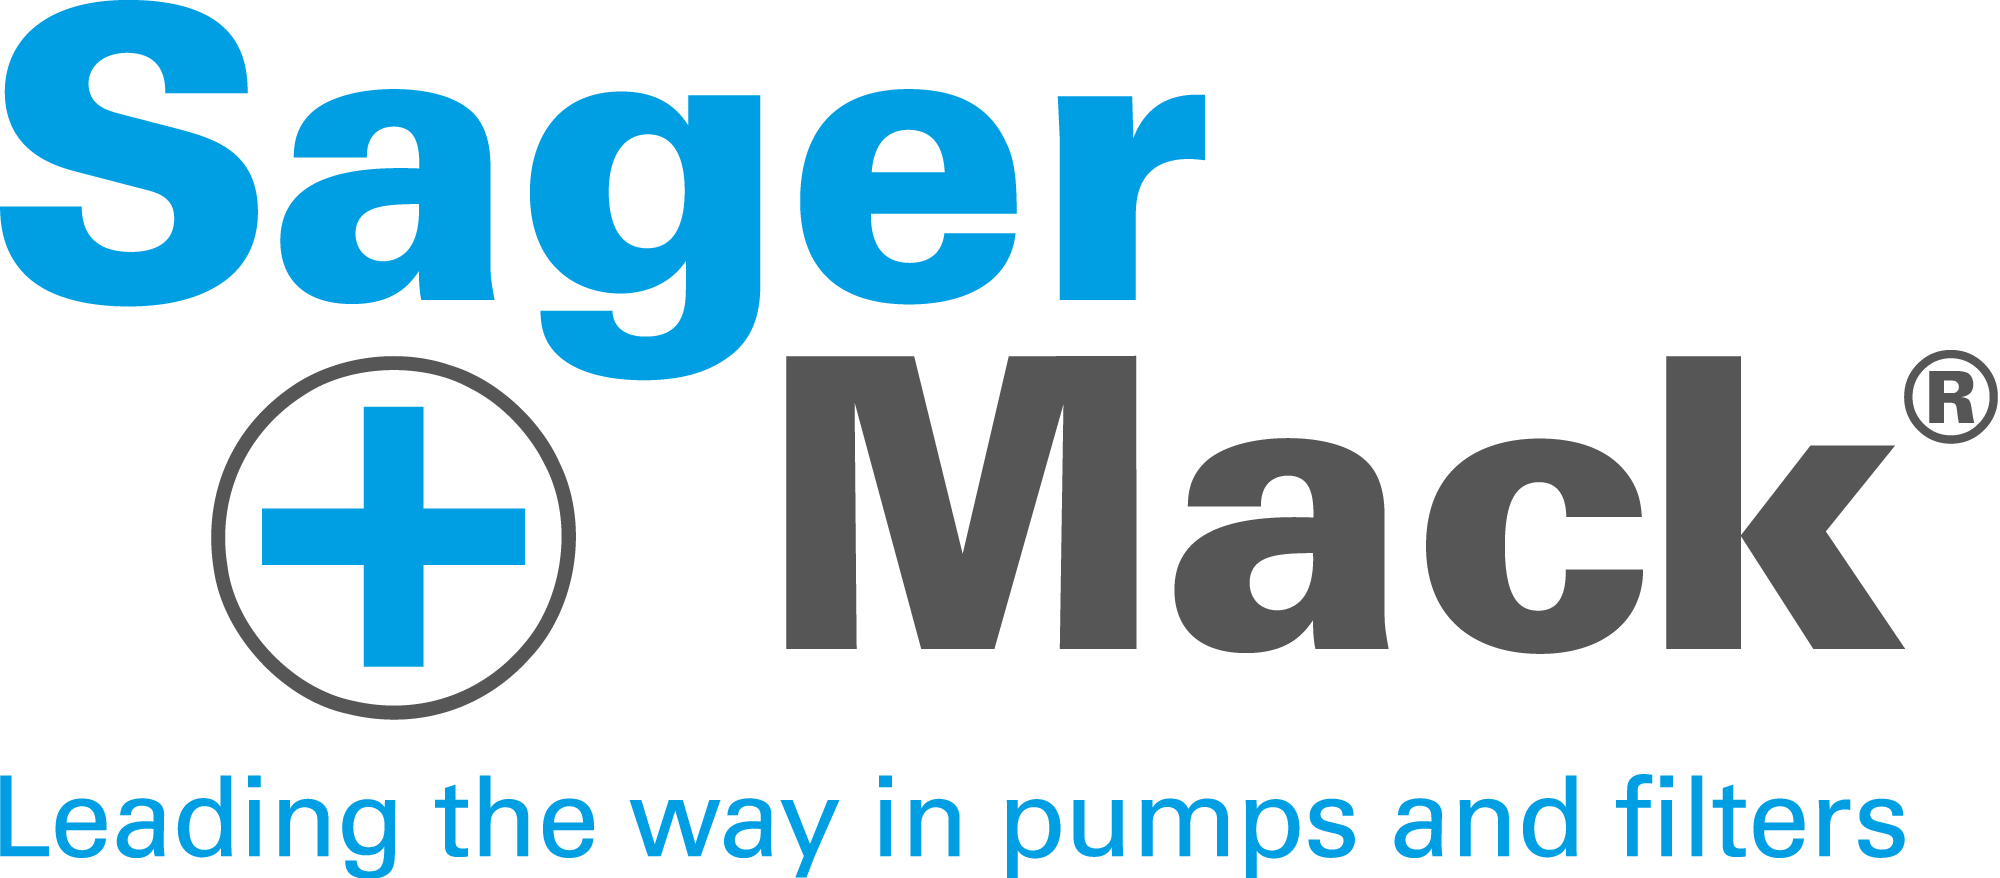 Sager + Mack GmbH & Co. KG | Leading the way in pumps and filters